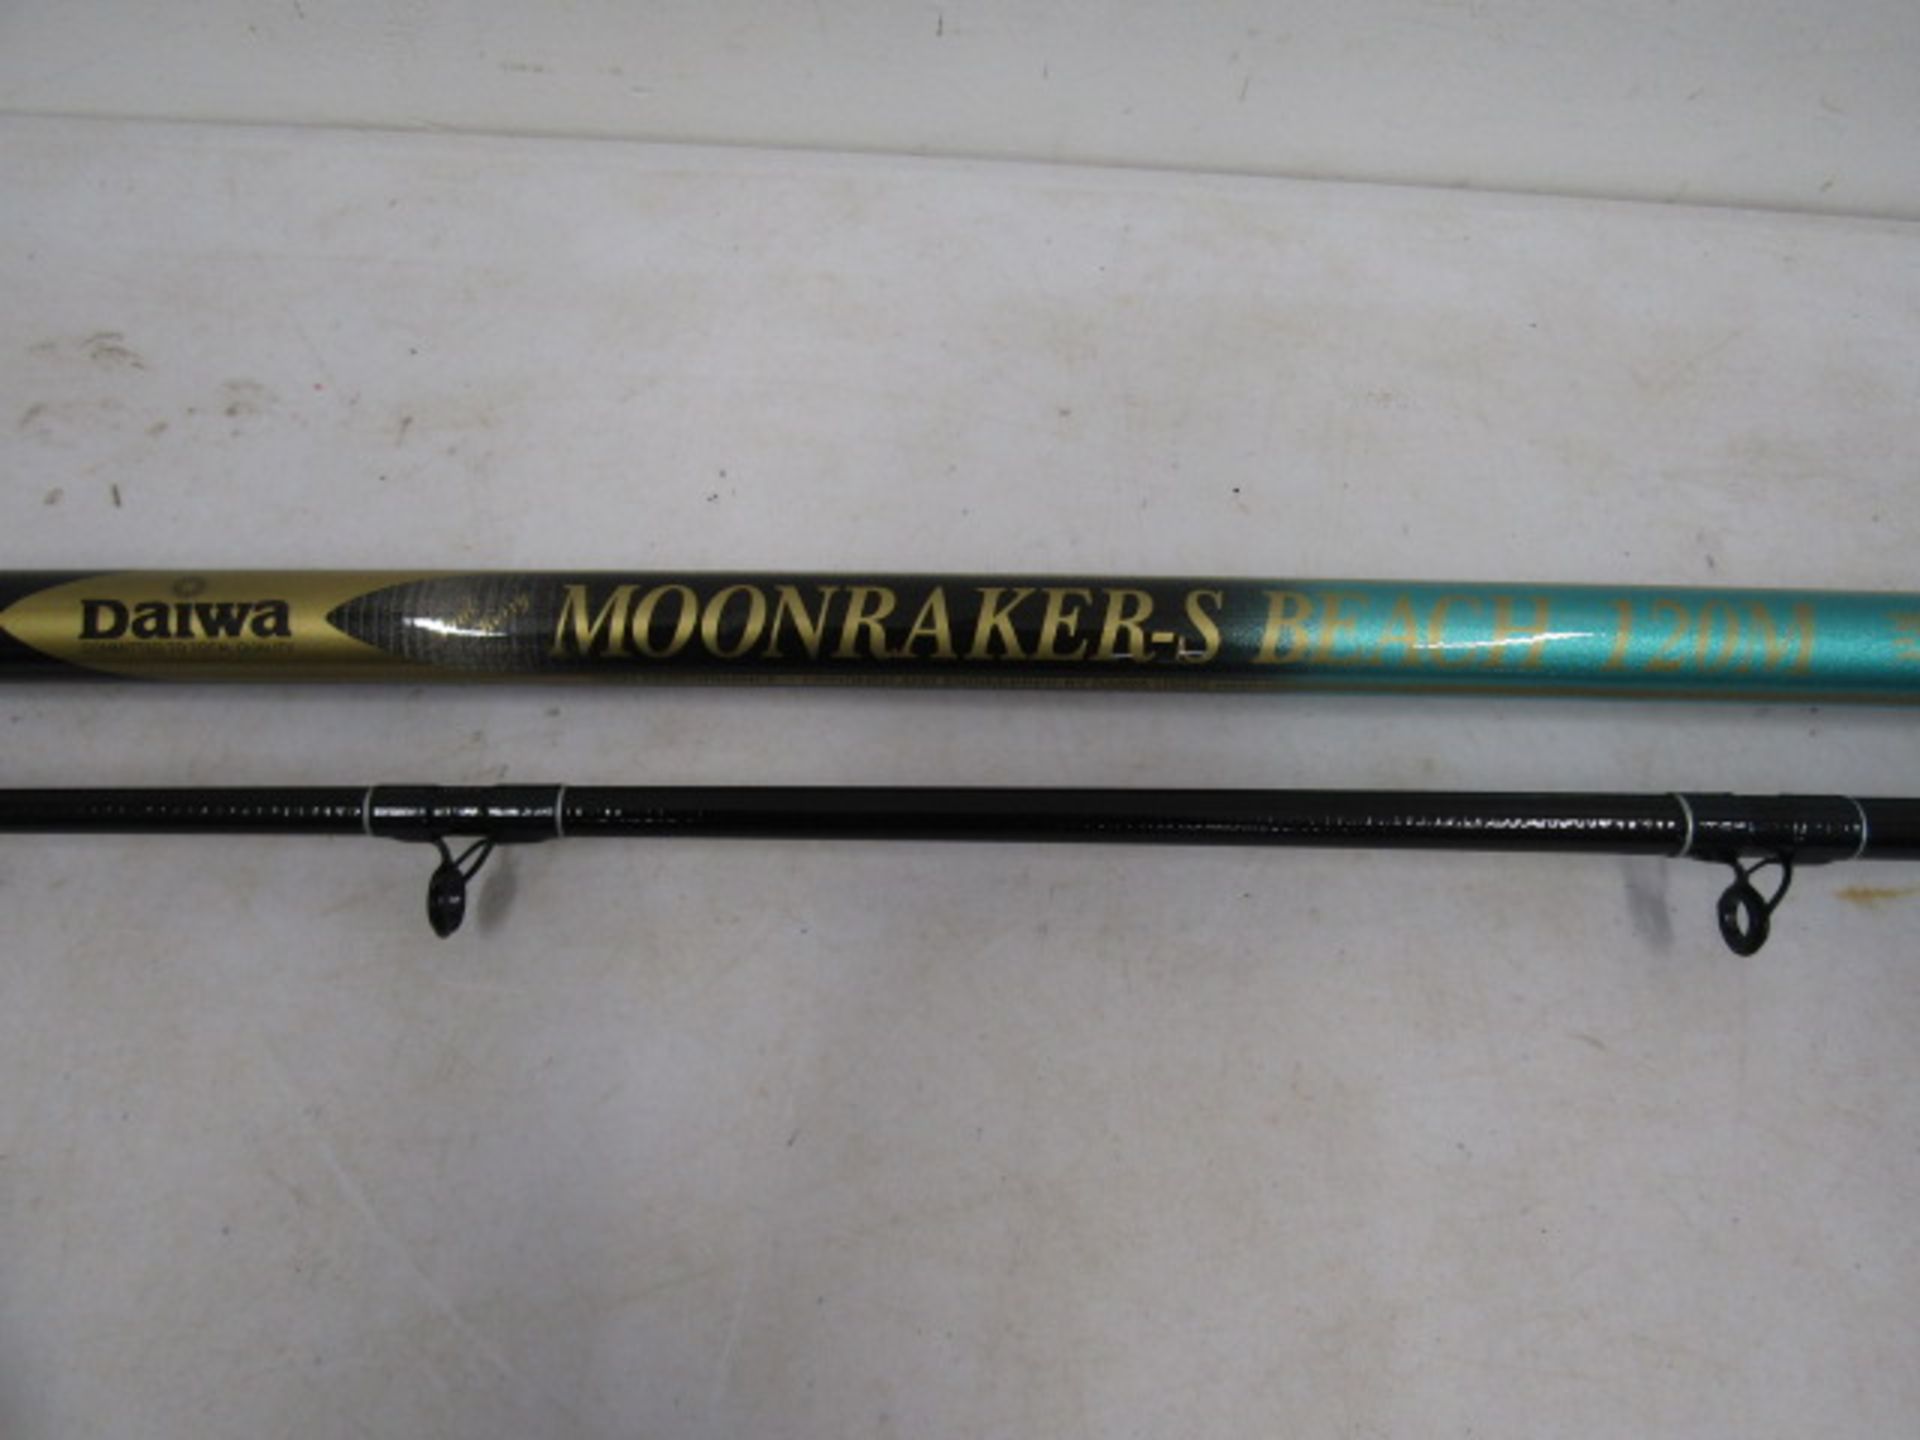 Daiwa Moonraker 12' beach rod, as new- never used, in canvas cover